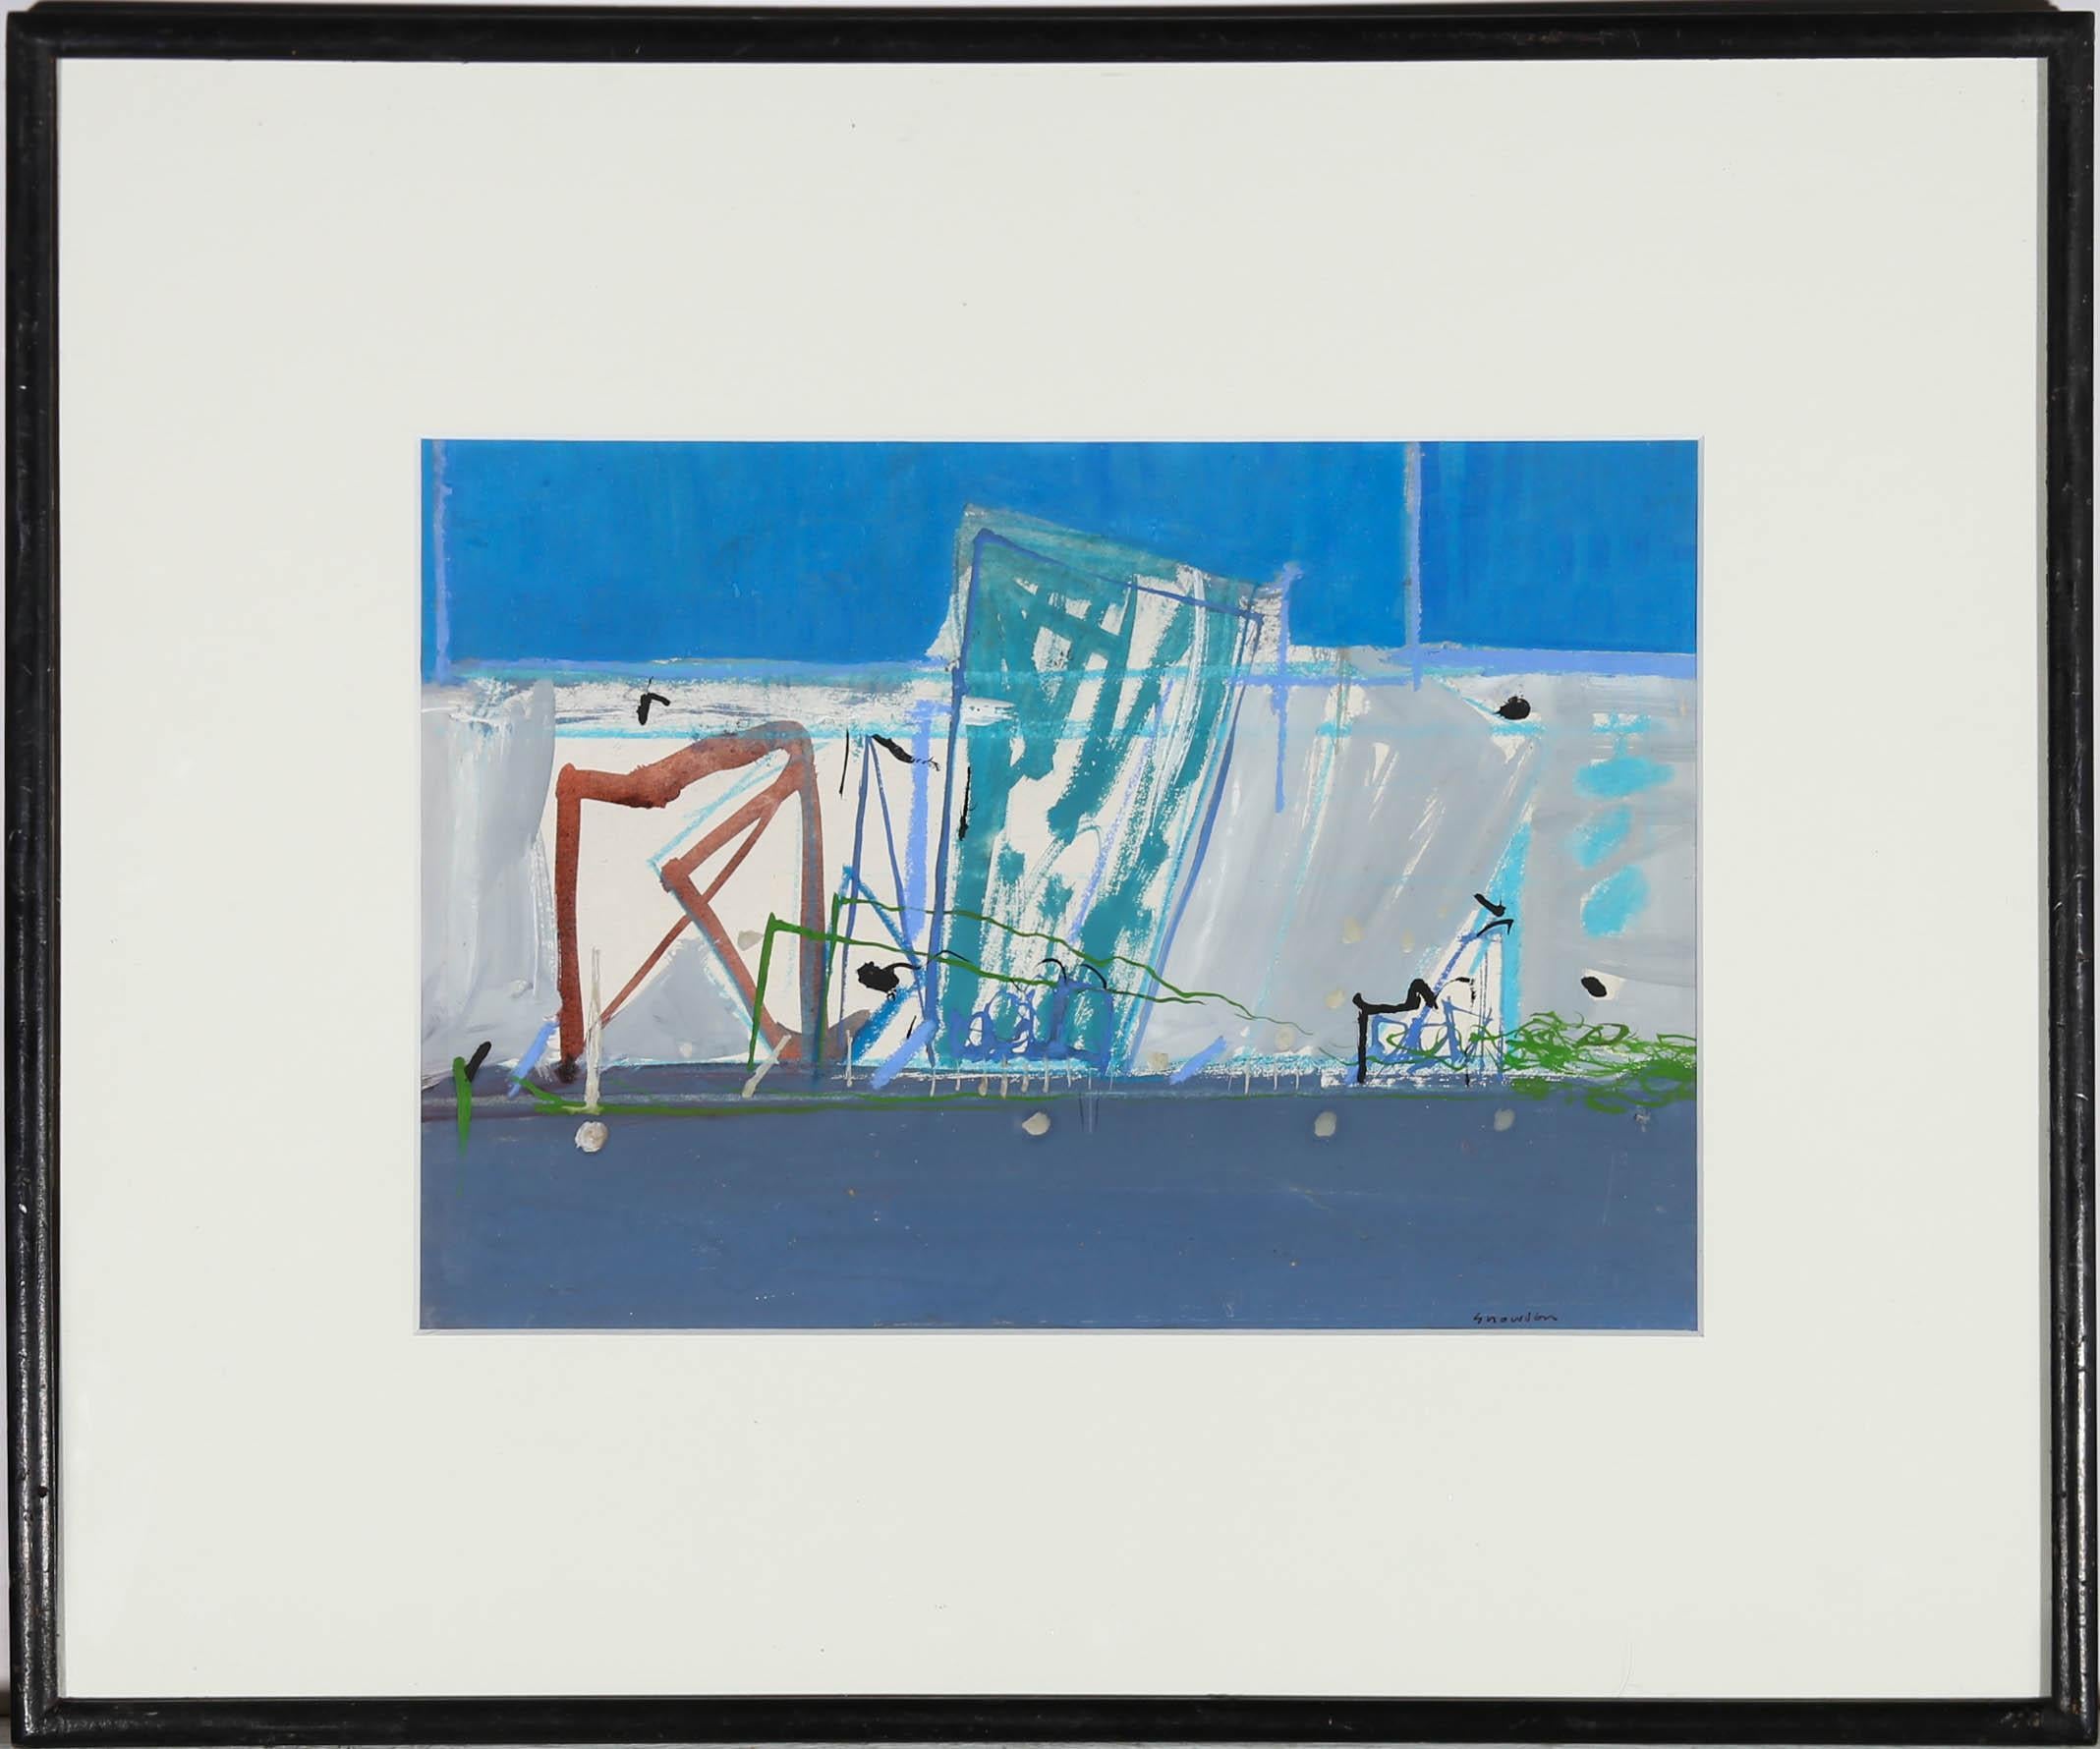 A striking abstract composition of an urban street captured in bold shades of blue acrylic, enhanced with painterly touches of red, white, and green. The painting is signed by the artist to the lower right. Newly mounted in a contemporary black